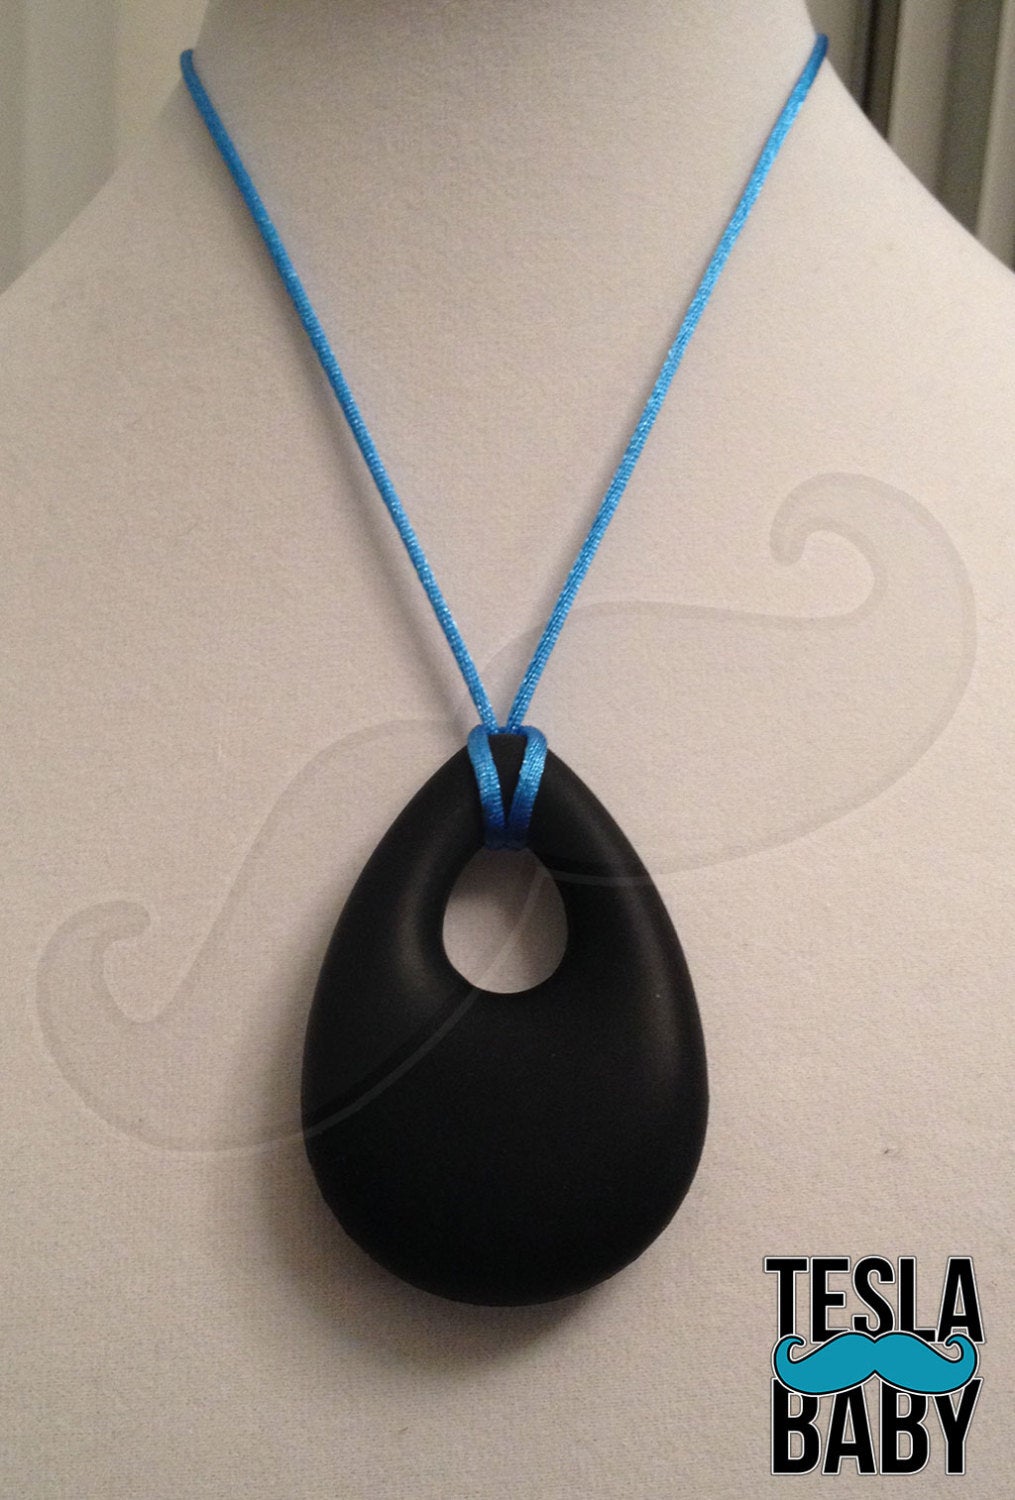 Silicone Pendant Necklace -- 3 7/8" x 2" navy silicone teardrop pendant; for fidgeting, sensory play, teething.